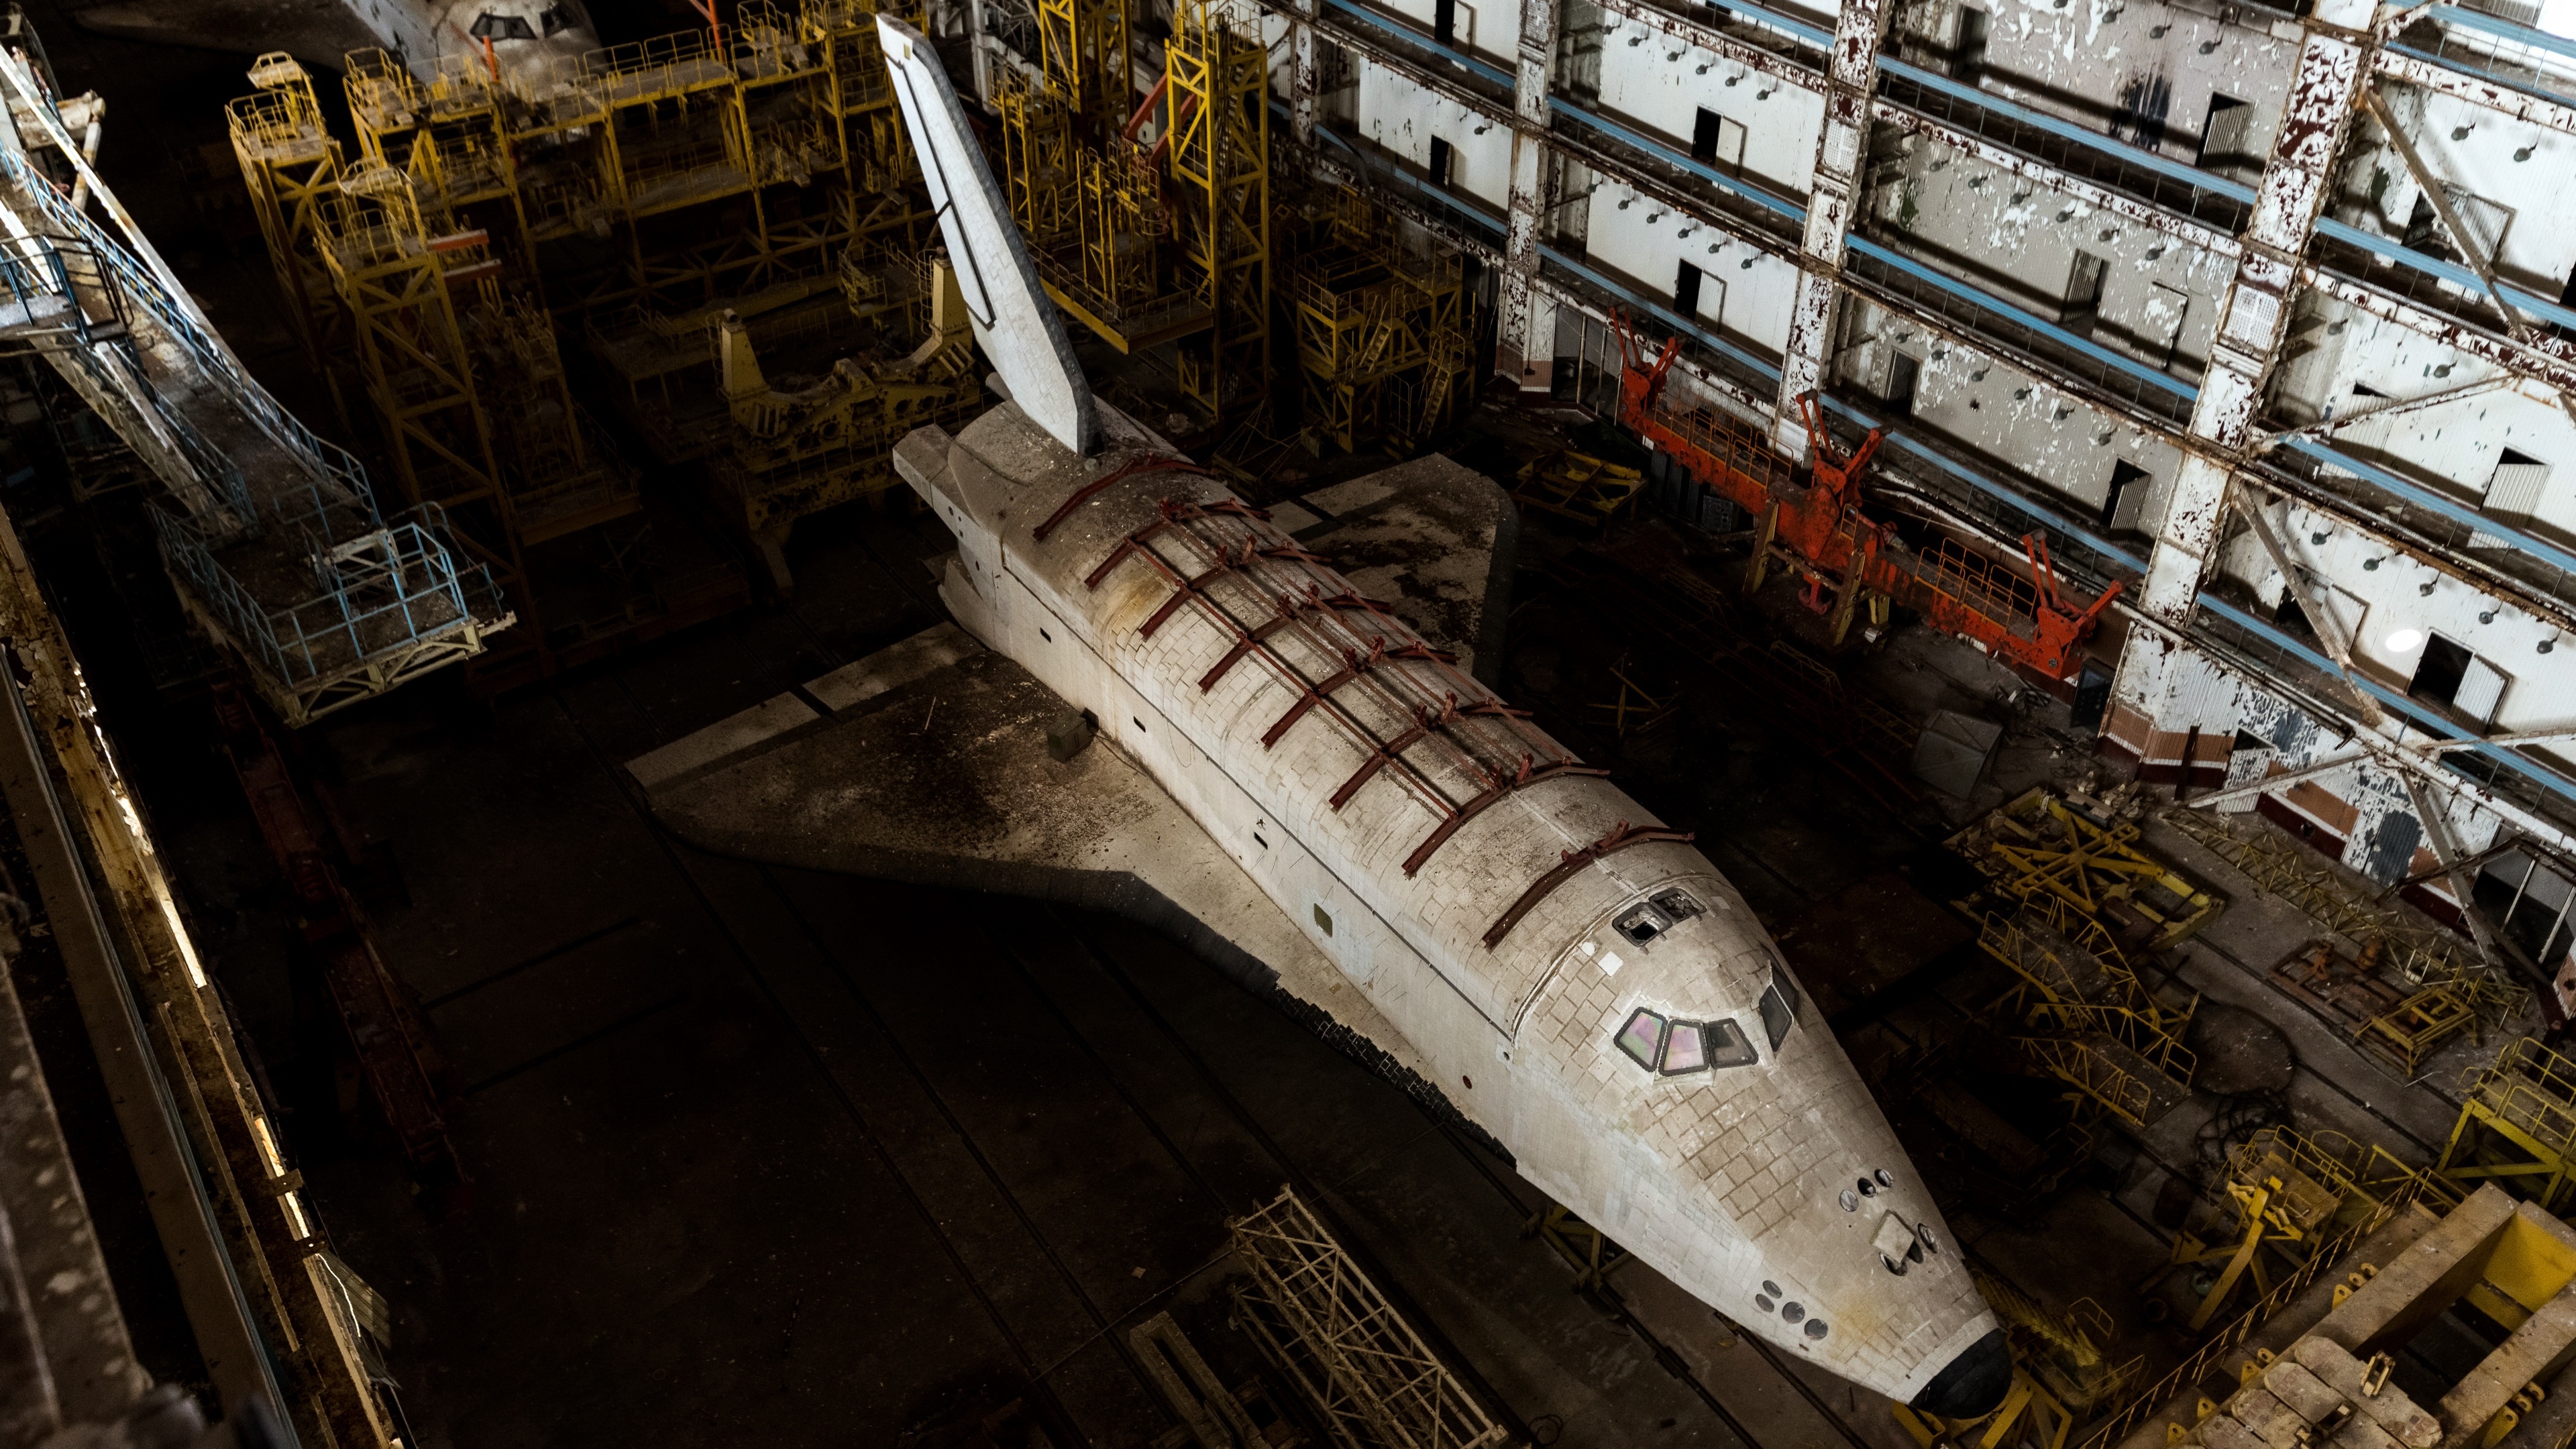 General 3840x2160 Buran vehicle space shuttle wreck abandoned USSR